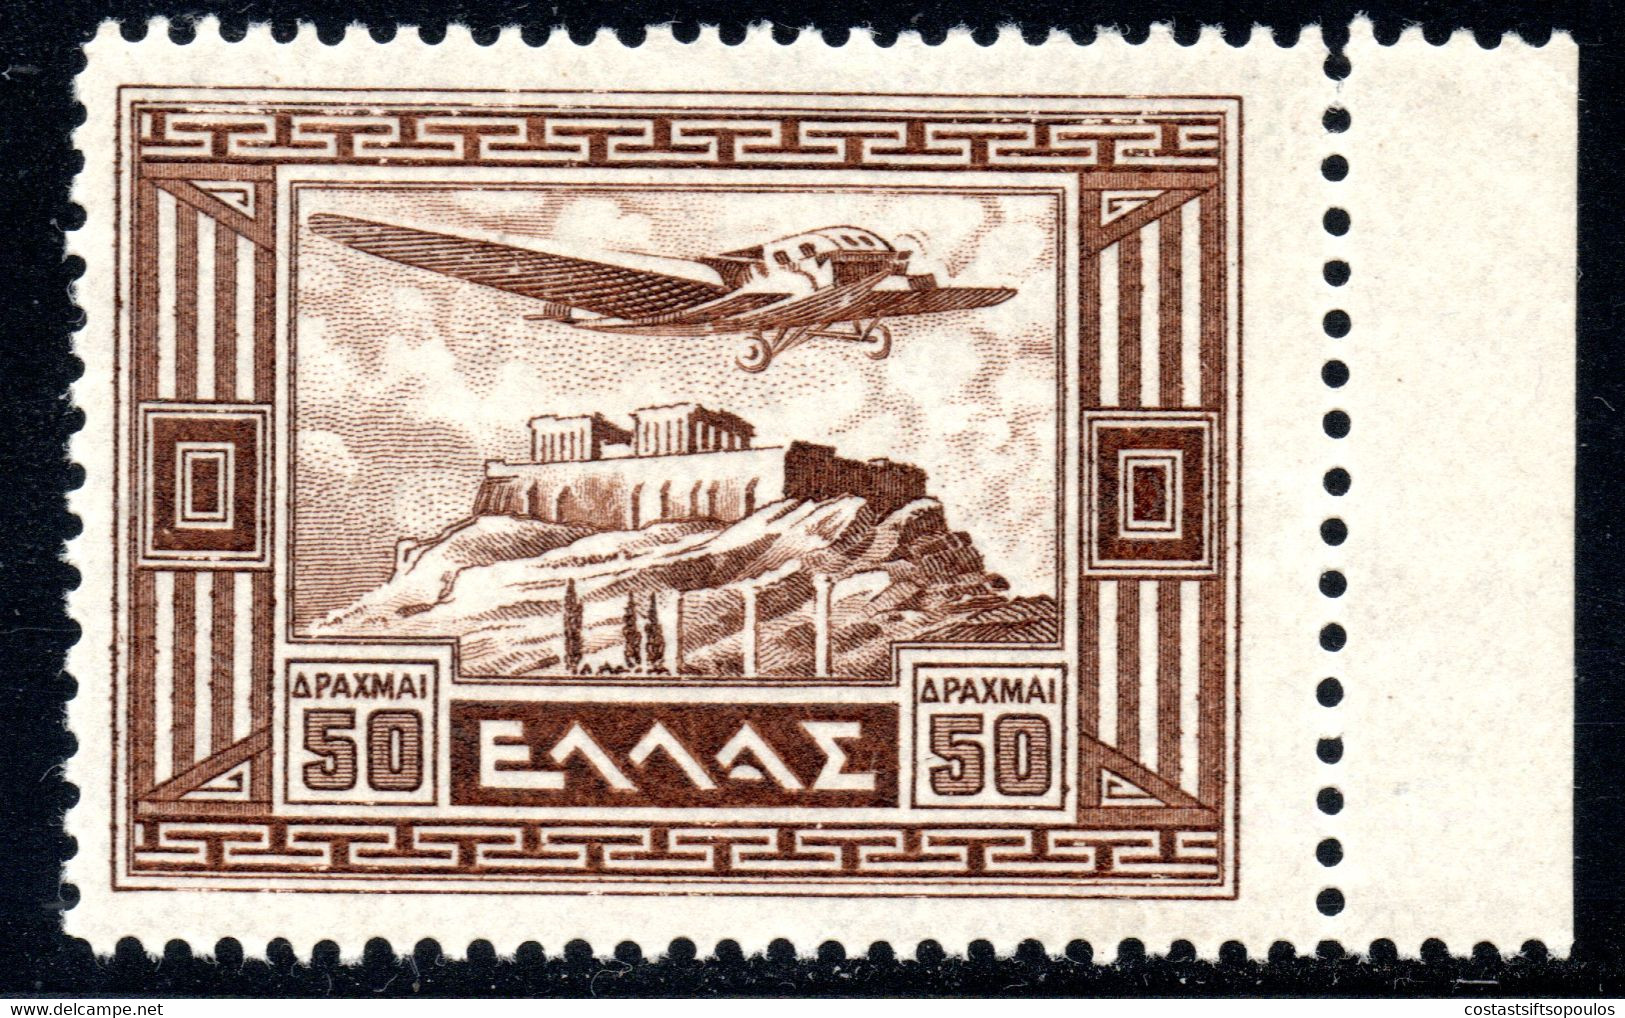 1413. GREECE 1933 AIR MAIL 50 DR. # 21 MNH. AIRPLANE OVER ACROPOLIS - Nuovi